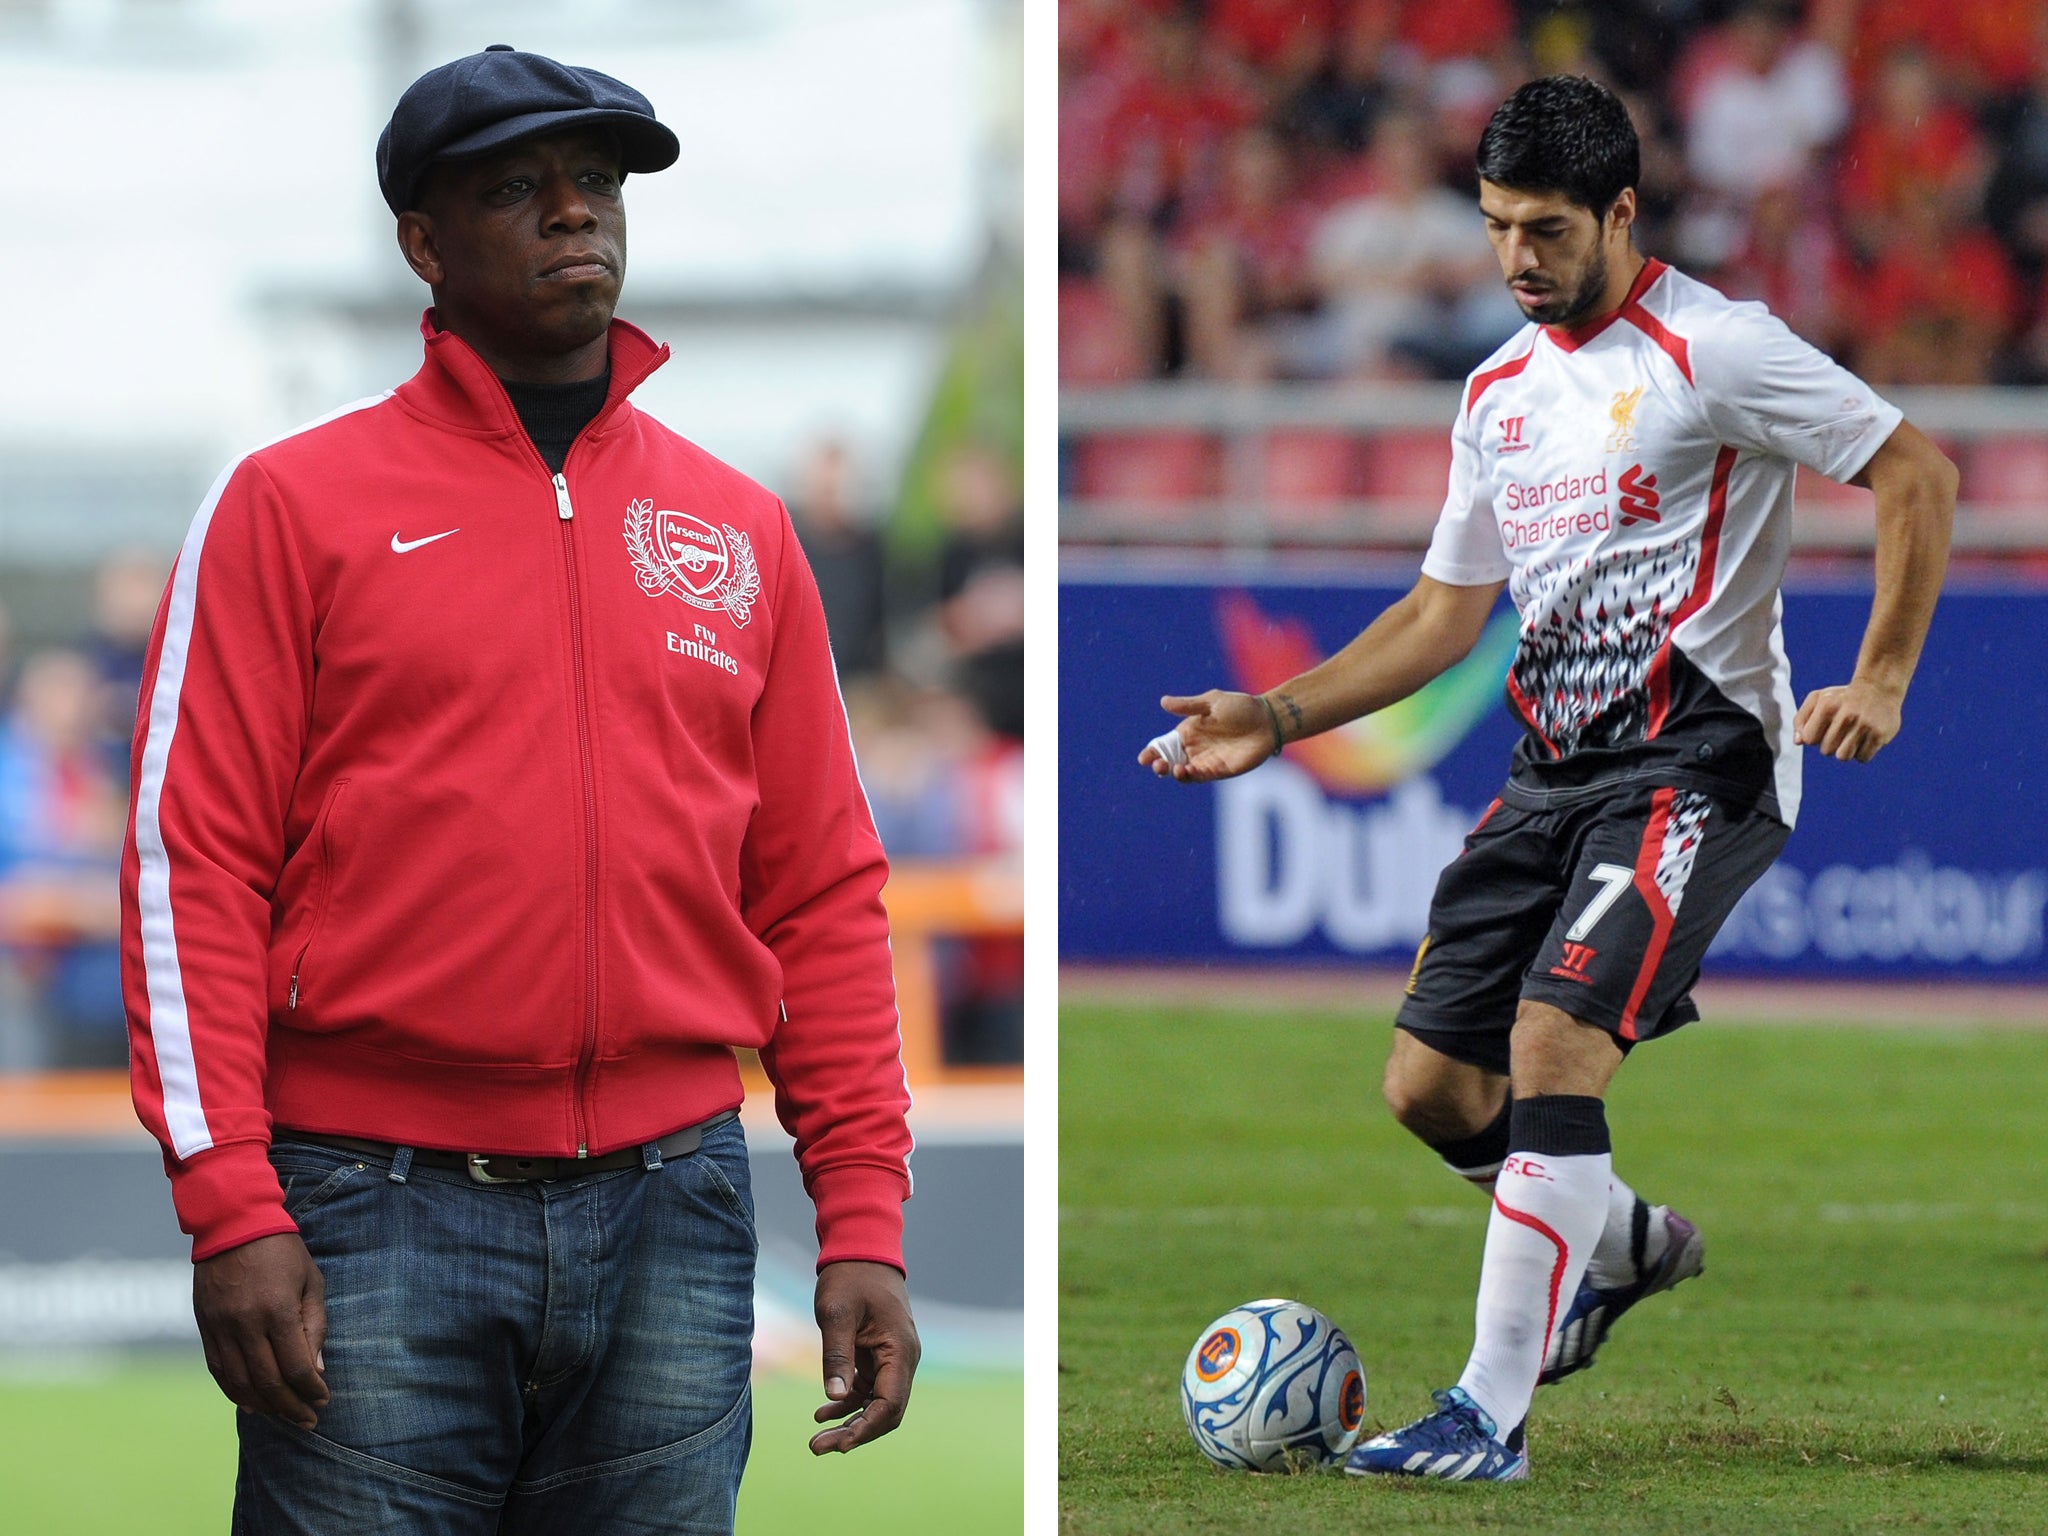 Ian Wright has questioned what a move to Arsenal would do for Luis Suarez